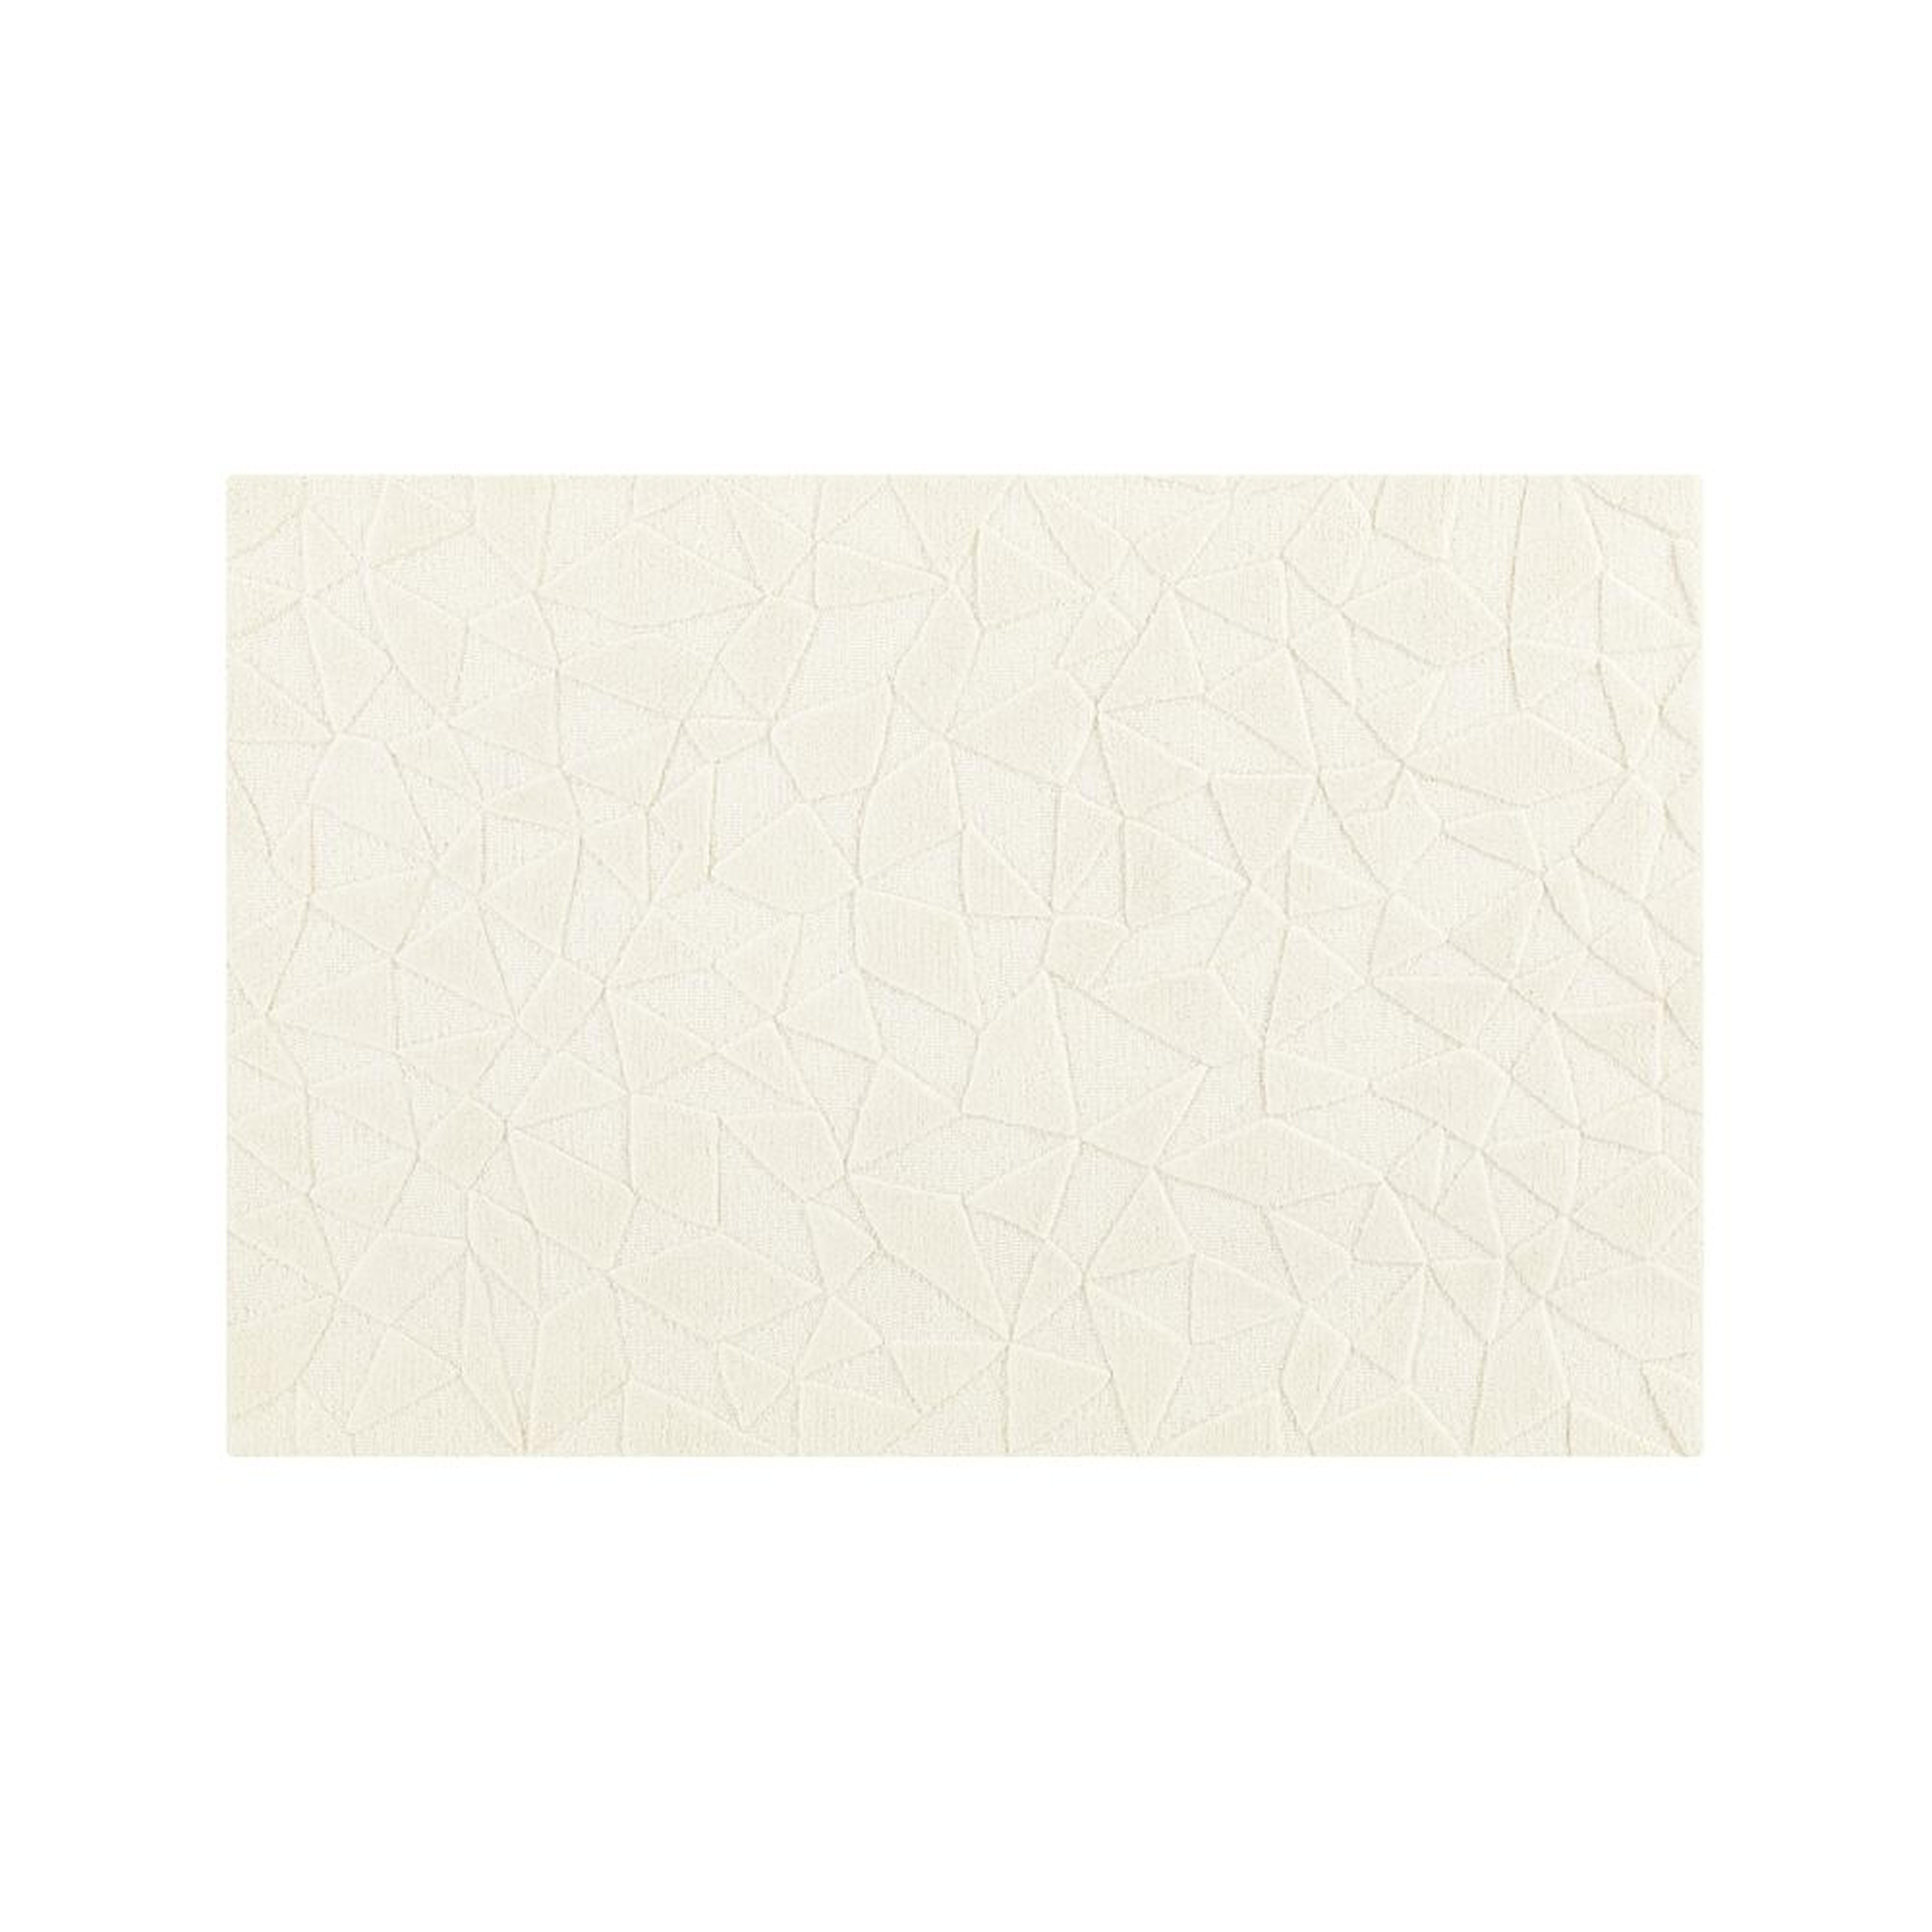 Modern Solid Cream Rug 8'x10' - Crate and Barrel